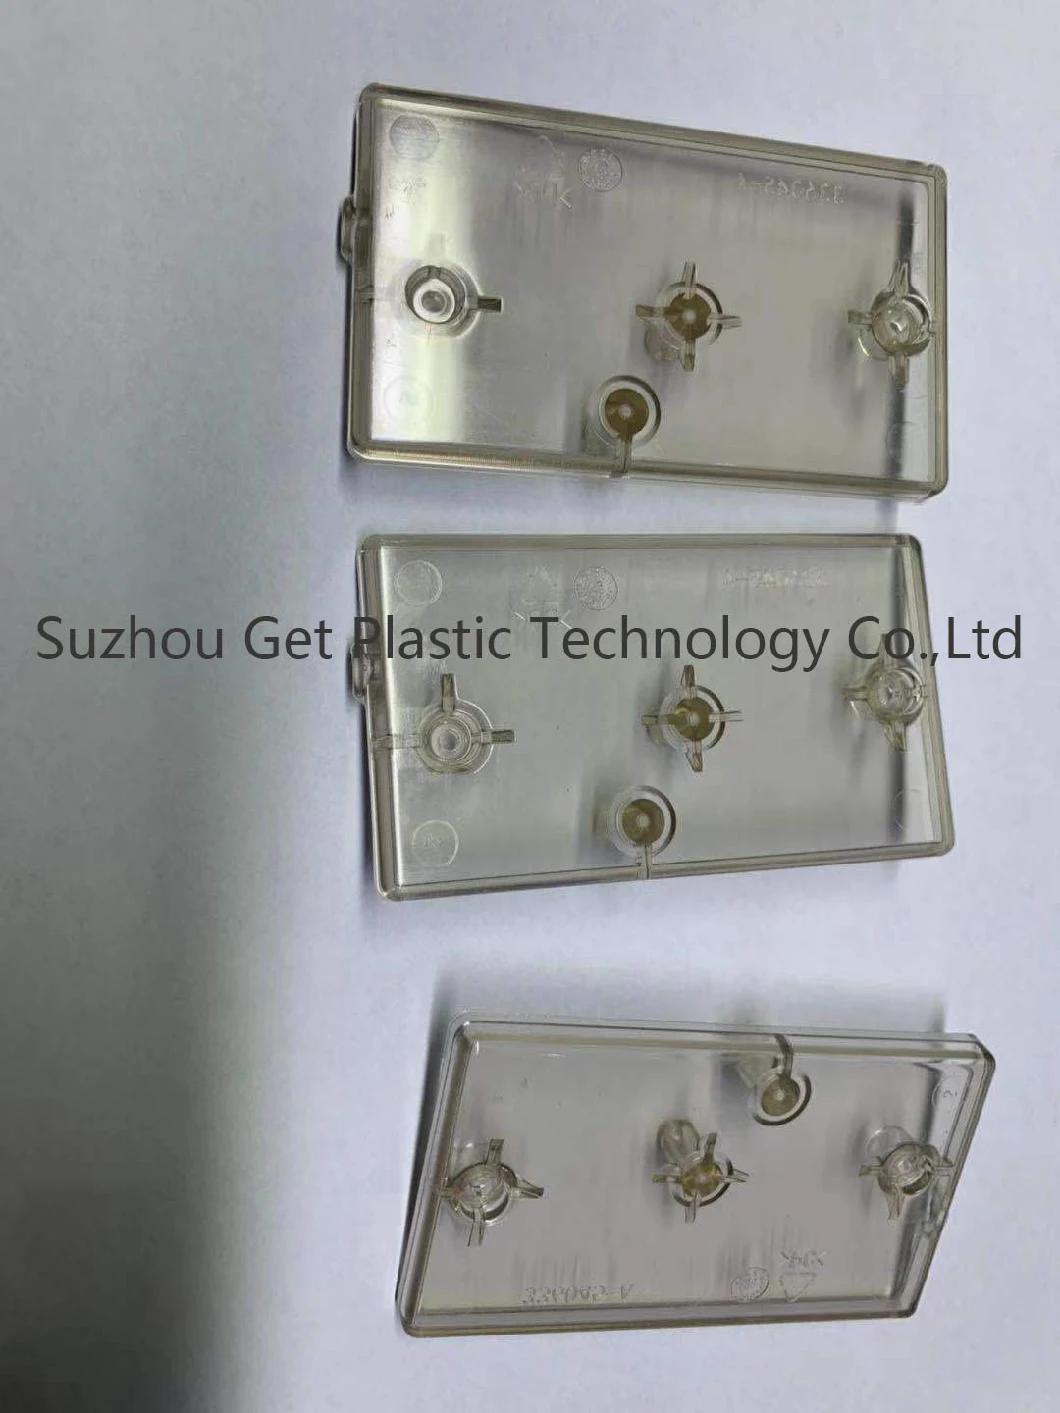 Customized Injection Mould for Good Plastic Parts in Factory